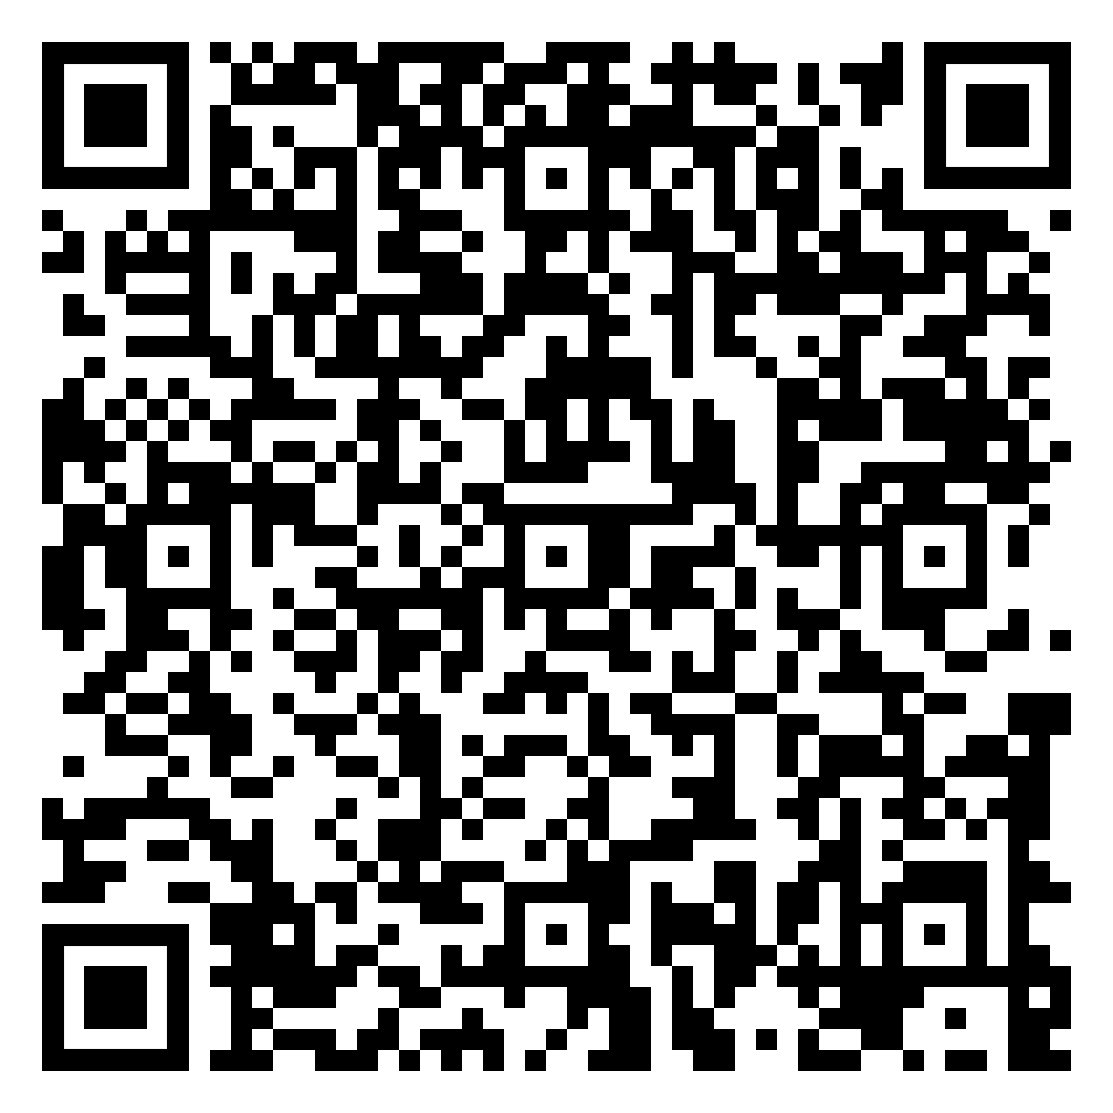 QR code: Simulate the system on-location in your lab environment